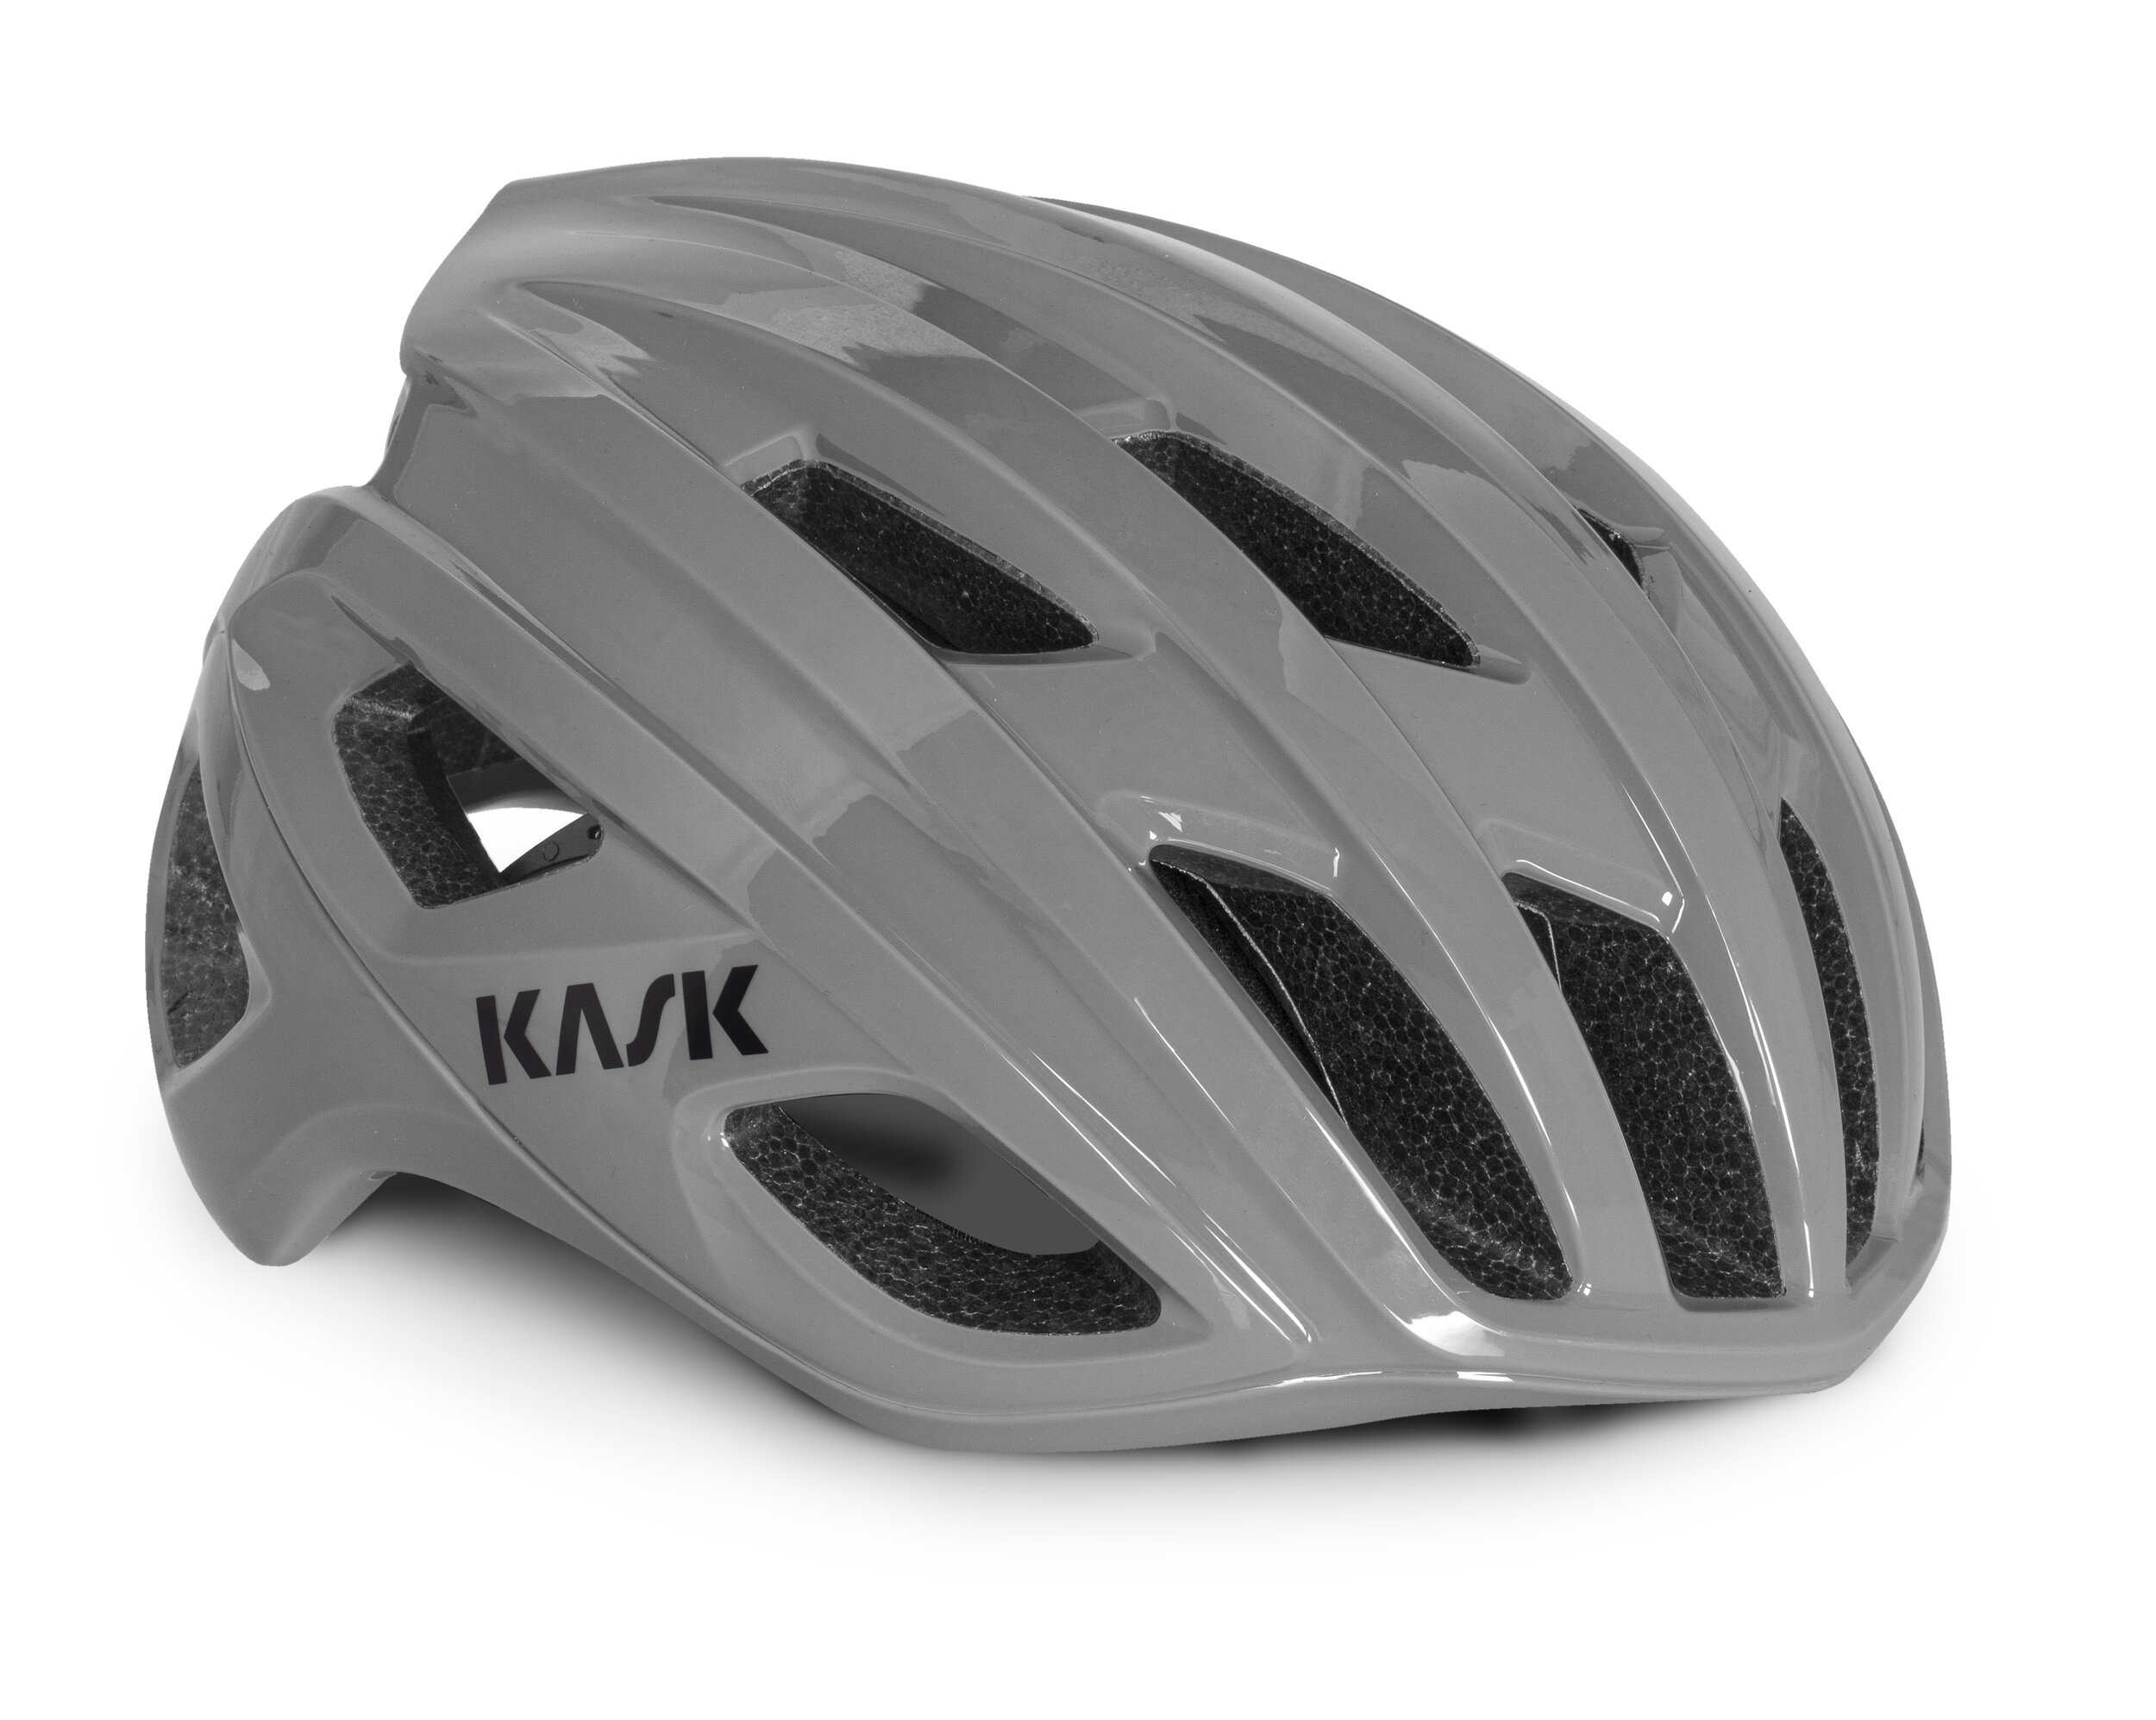 MOJITO CUBED-White Size Medium KASK Cycling Helmet 